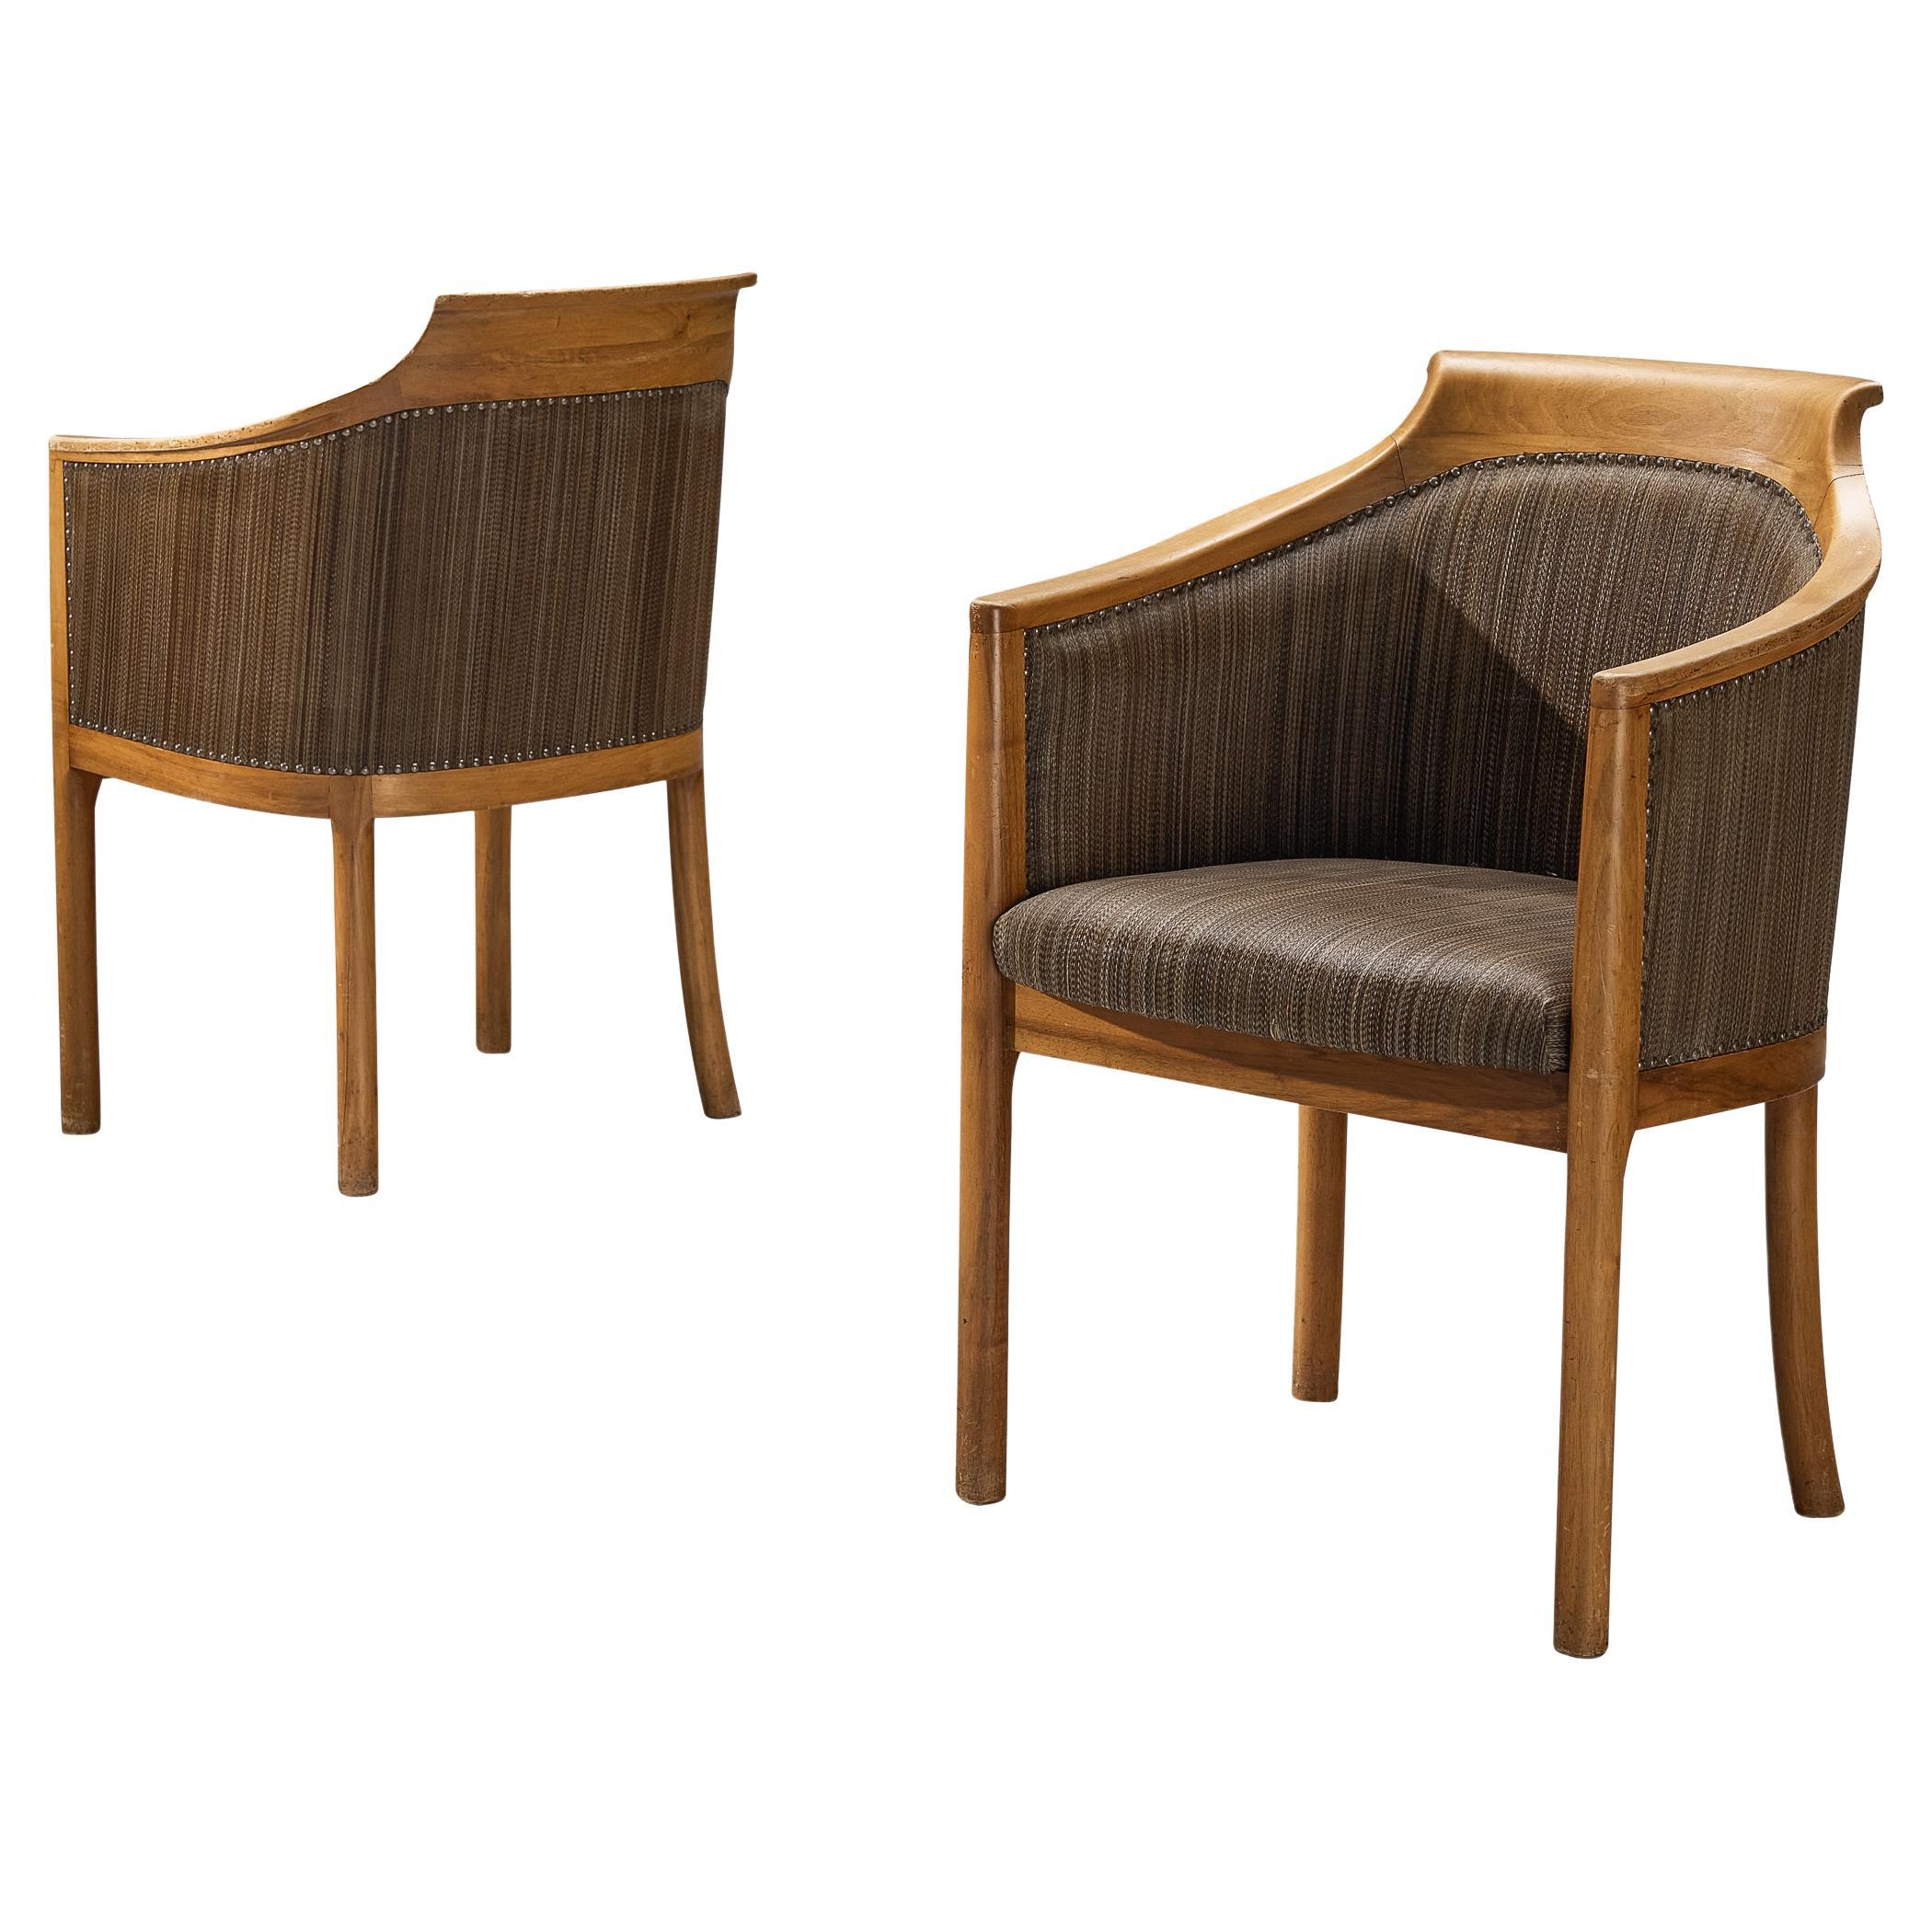 Swedish Elegant Pair of Armchairs in Walnut and Horsehair